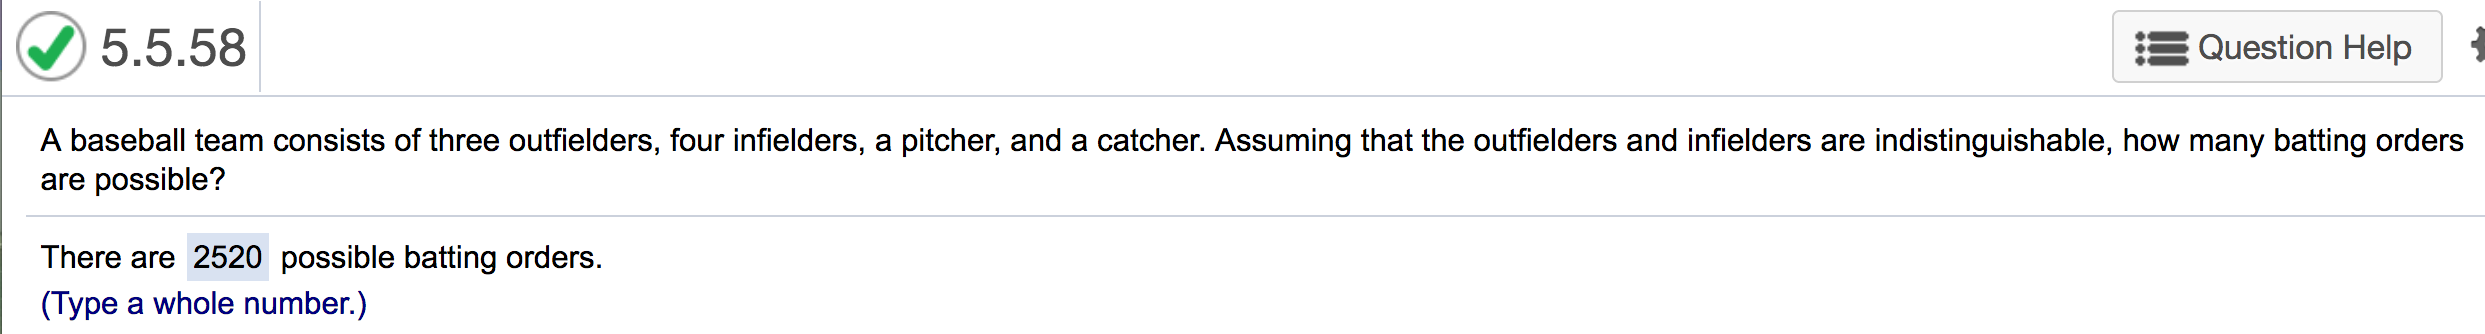 5.5.58
Question Help
A baseball team consists of three outfielders, four infielders, a pitcher, and a catcher. Assuming that the outfielders and infielders are indistinguishable, how many batting orders
are possible?
There are 2520 possible batting orders.
(Type a whole number.)
